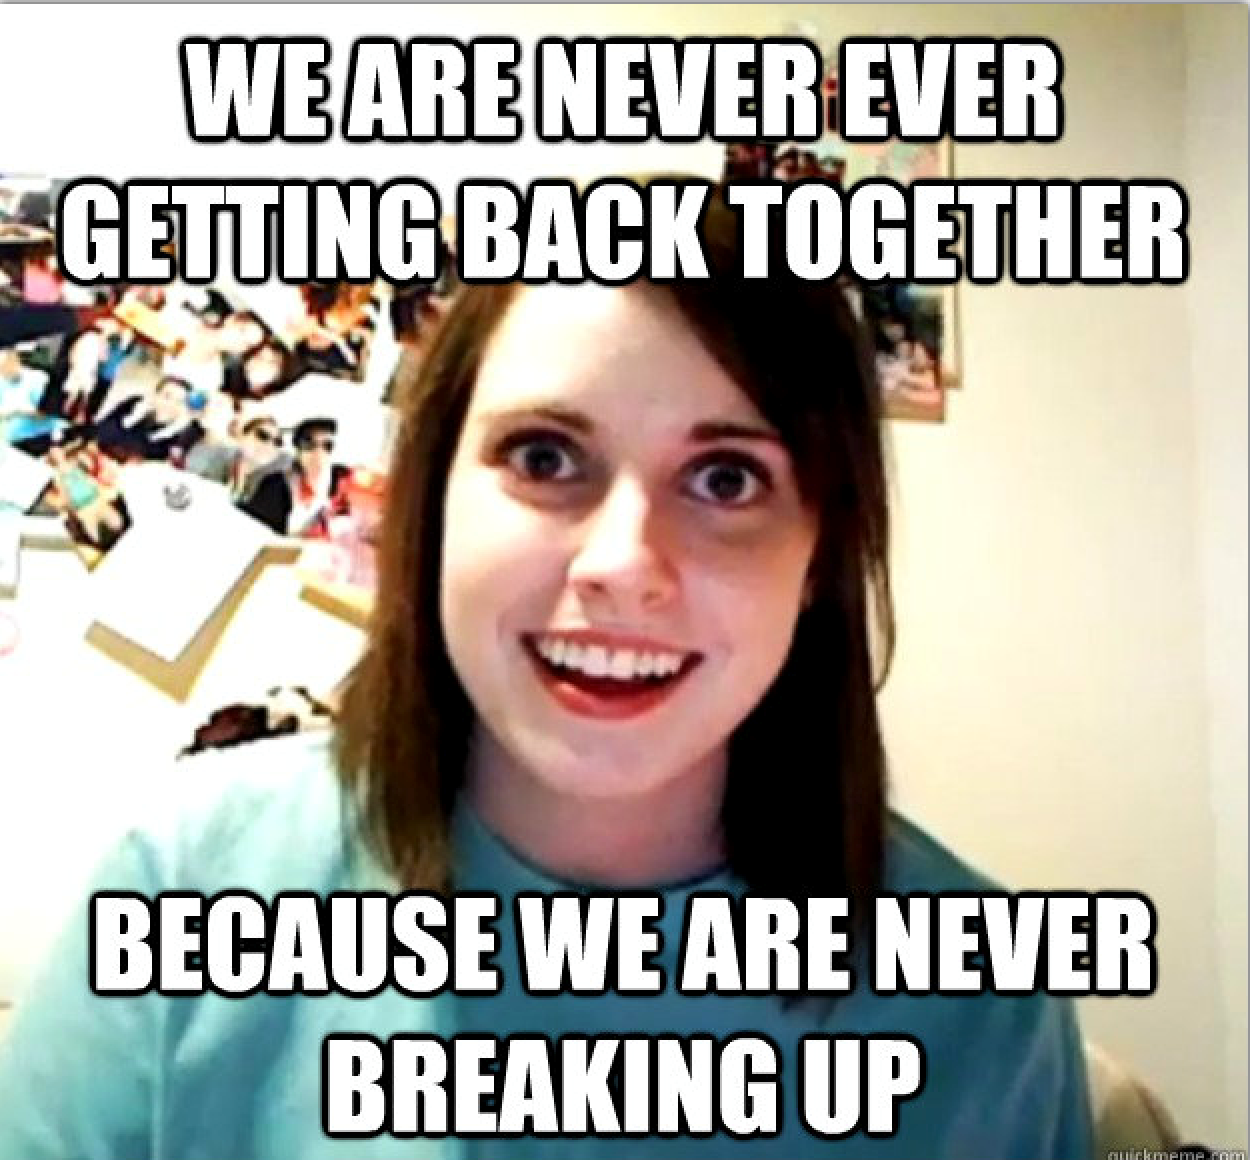 Together because Мем. No girlfriend no problem Мем. We are never ever getting back together. Overly. Get back together